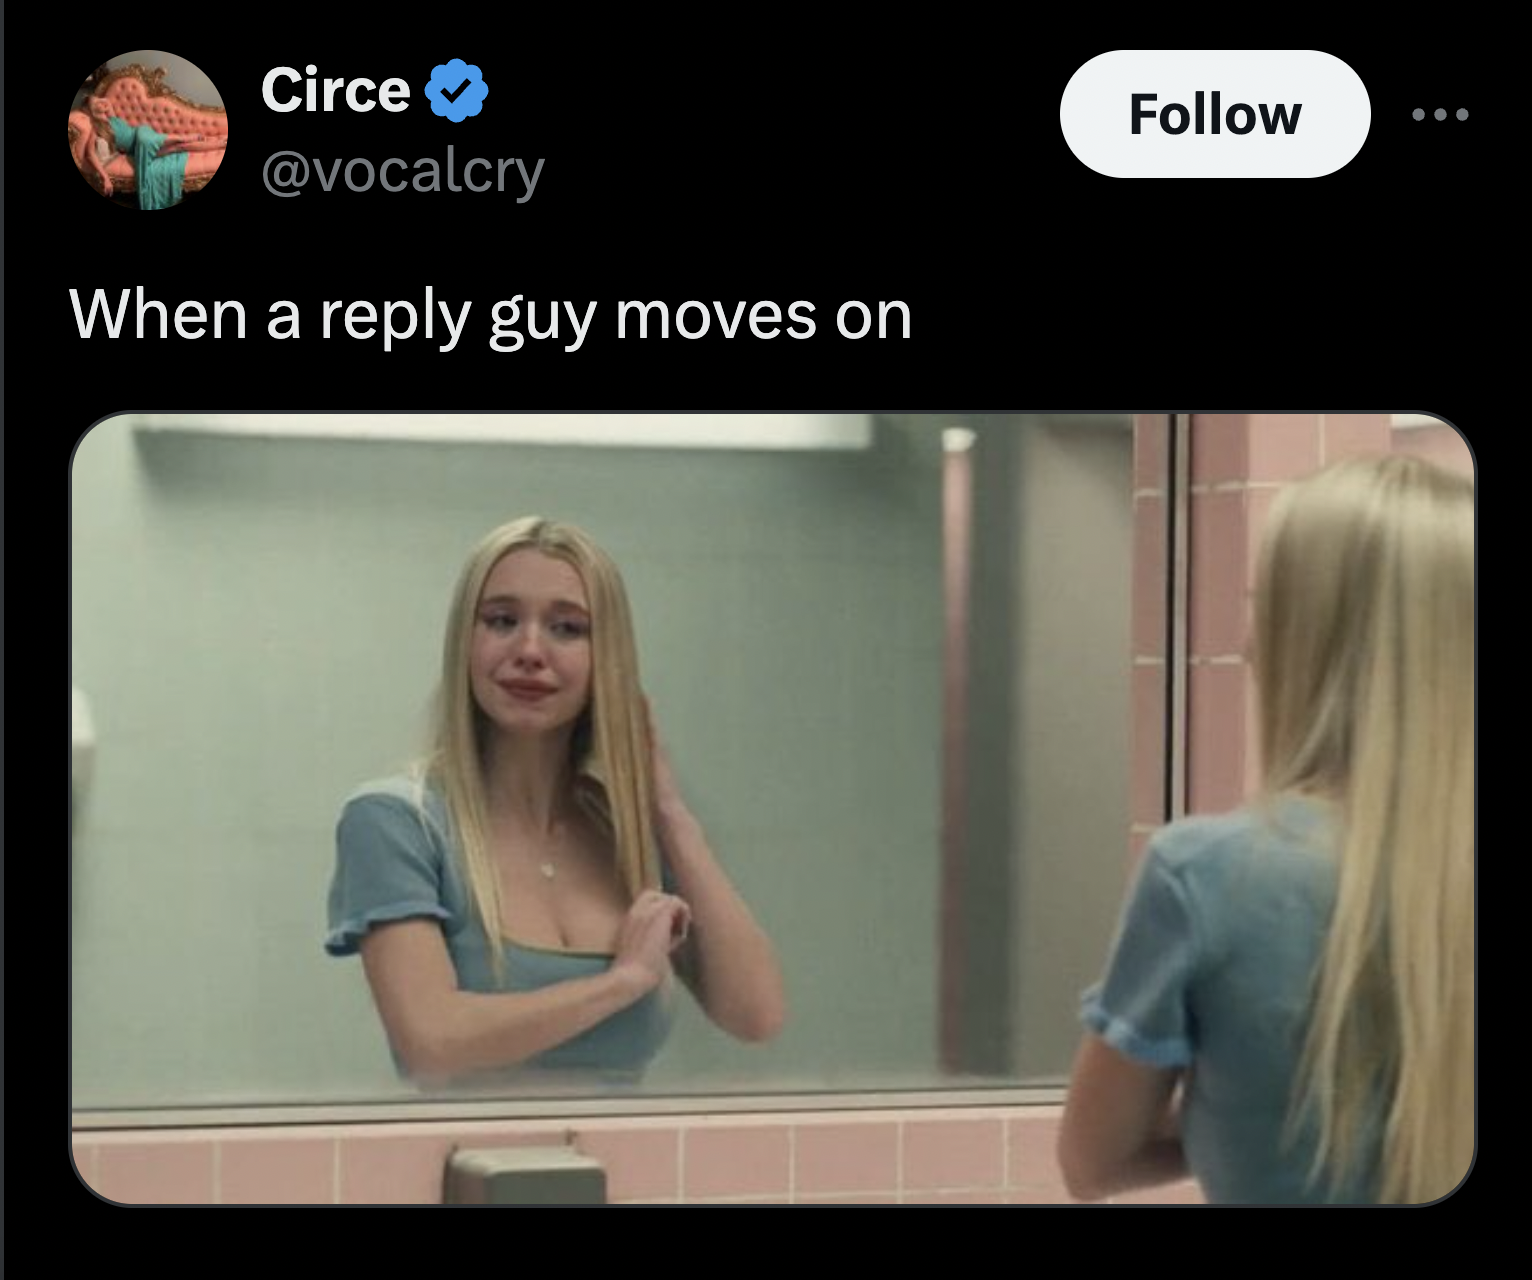 screenshot - Circe When a guy moves on